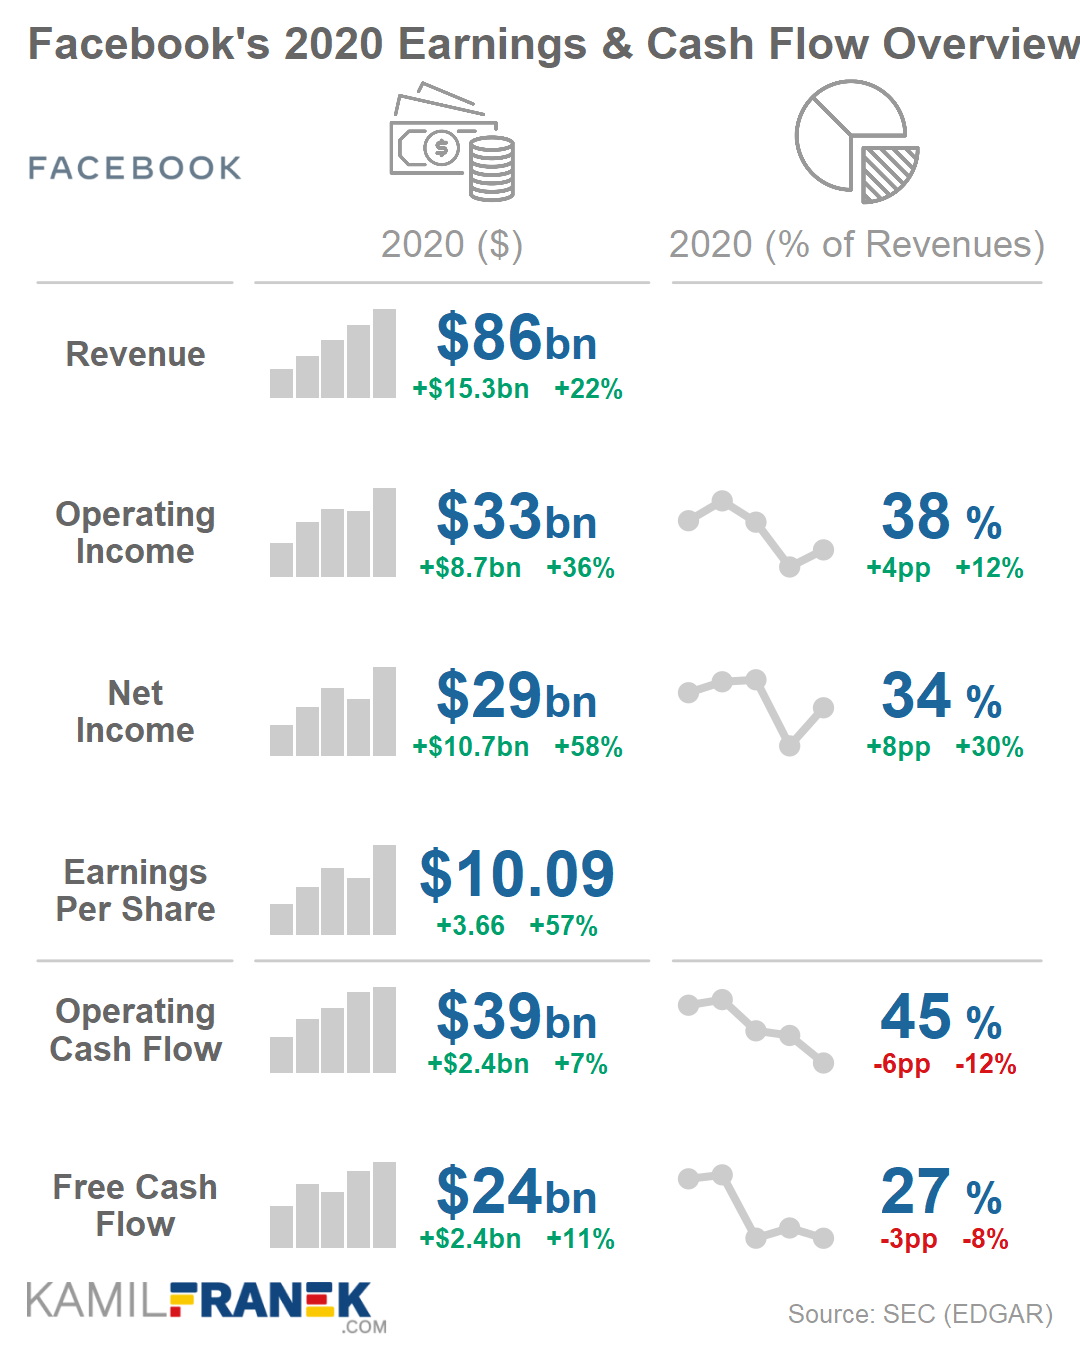 facebook financial statements overview analysis 2020 kamil franek business analytics how to write a income statement